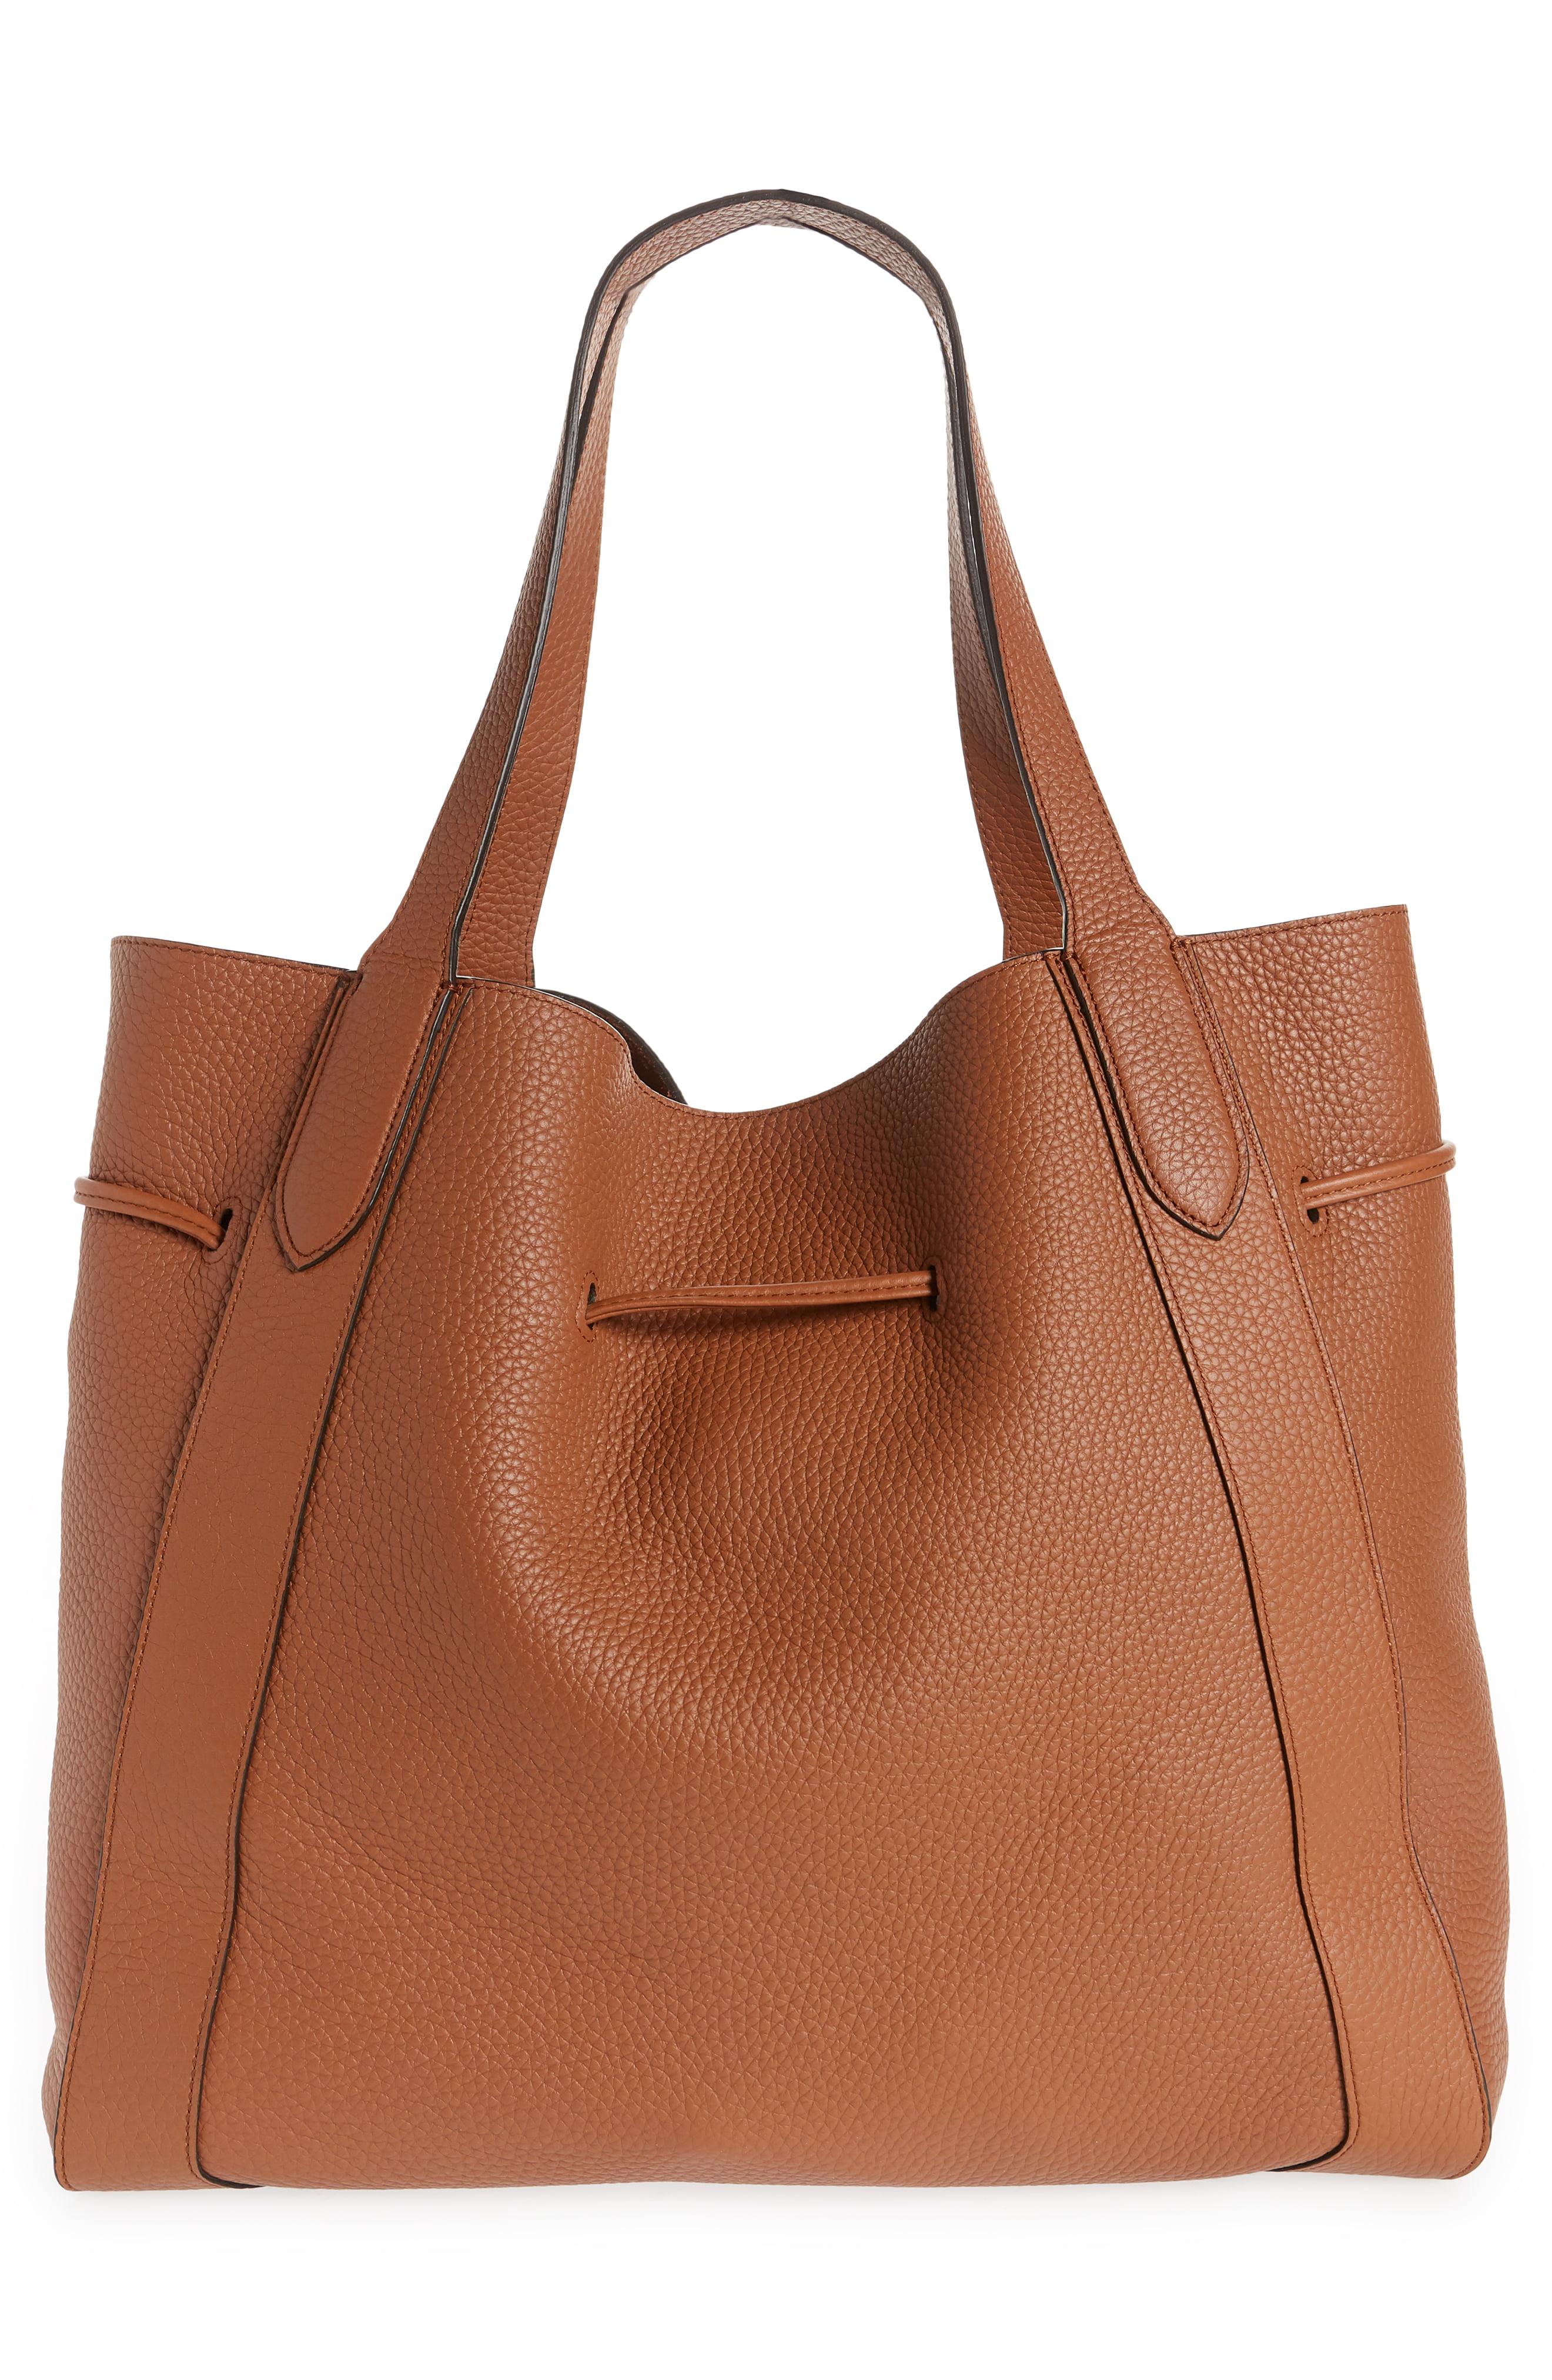 Mulberry Millie Leather Tote in Brown | Lyst